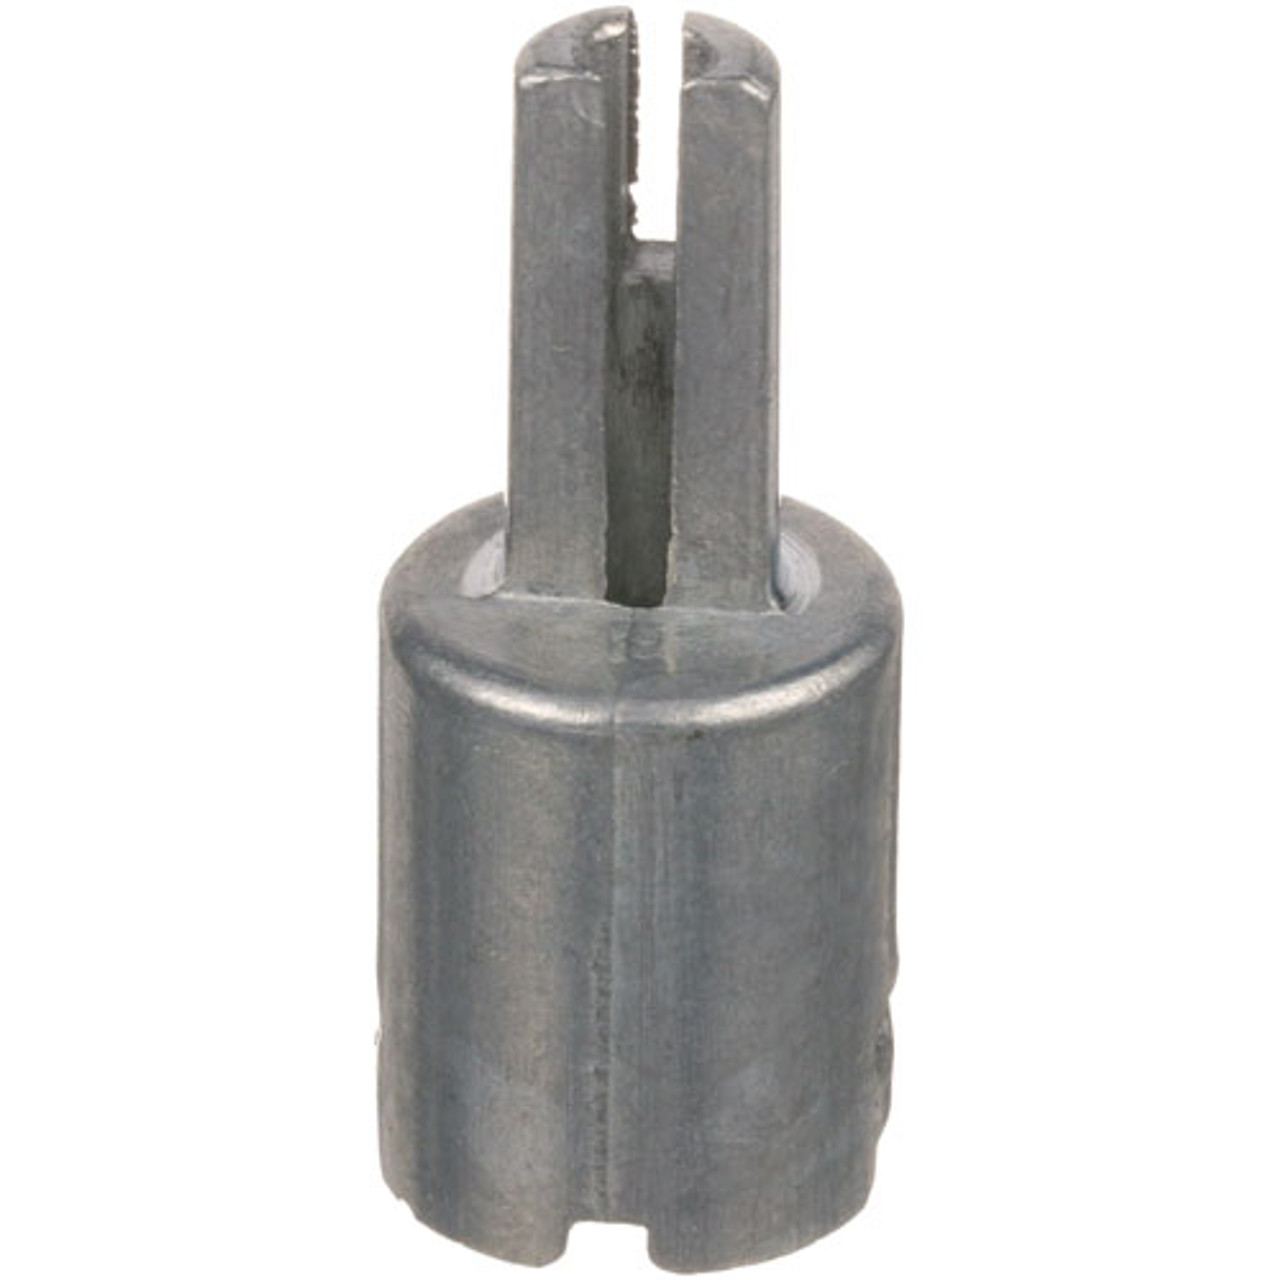 Stem Adapter - Replacement Part For Star Mfg 59010